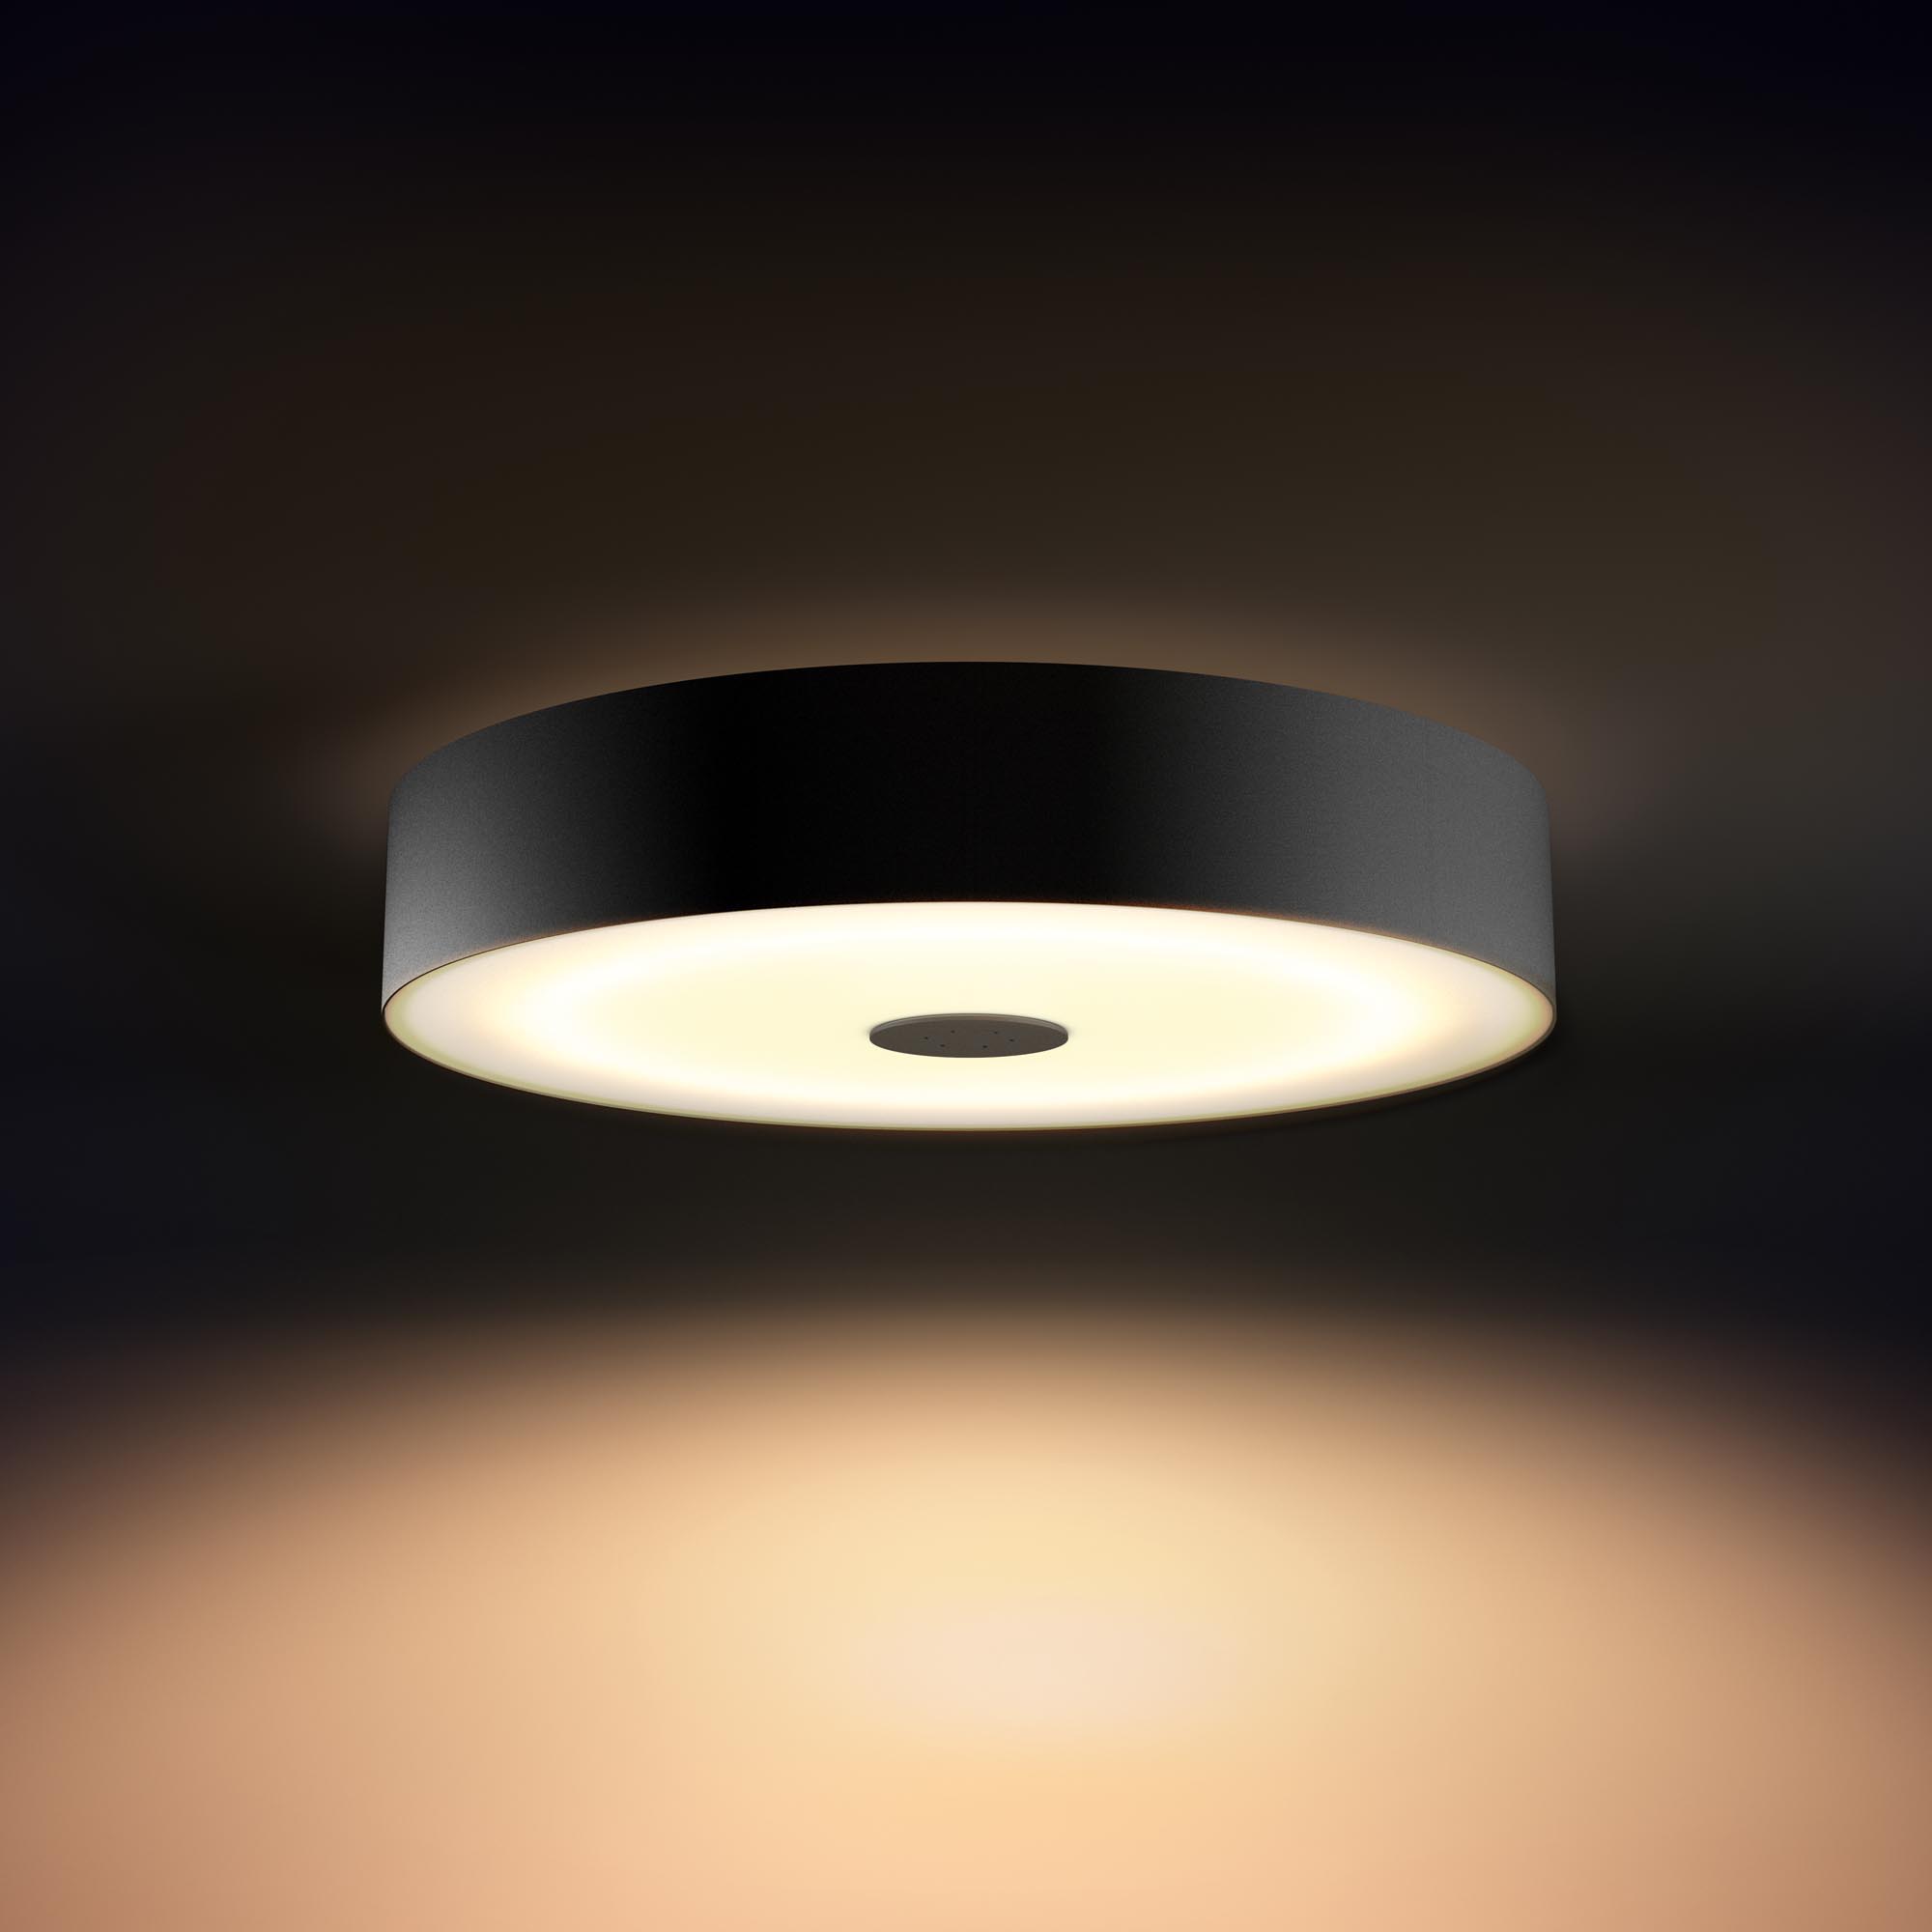 Philips Hue White Ambiance Fair LED Ceiling Light black 2900lm incl. Dimmer Switch